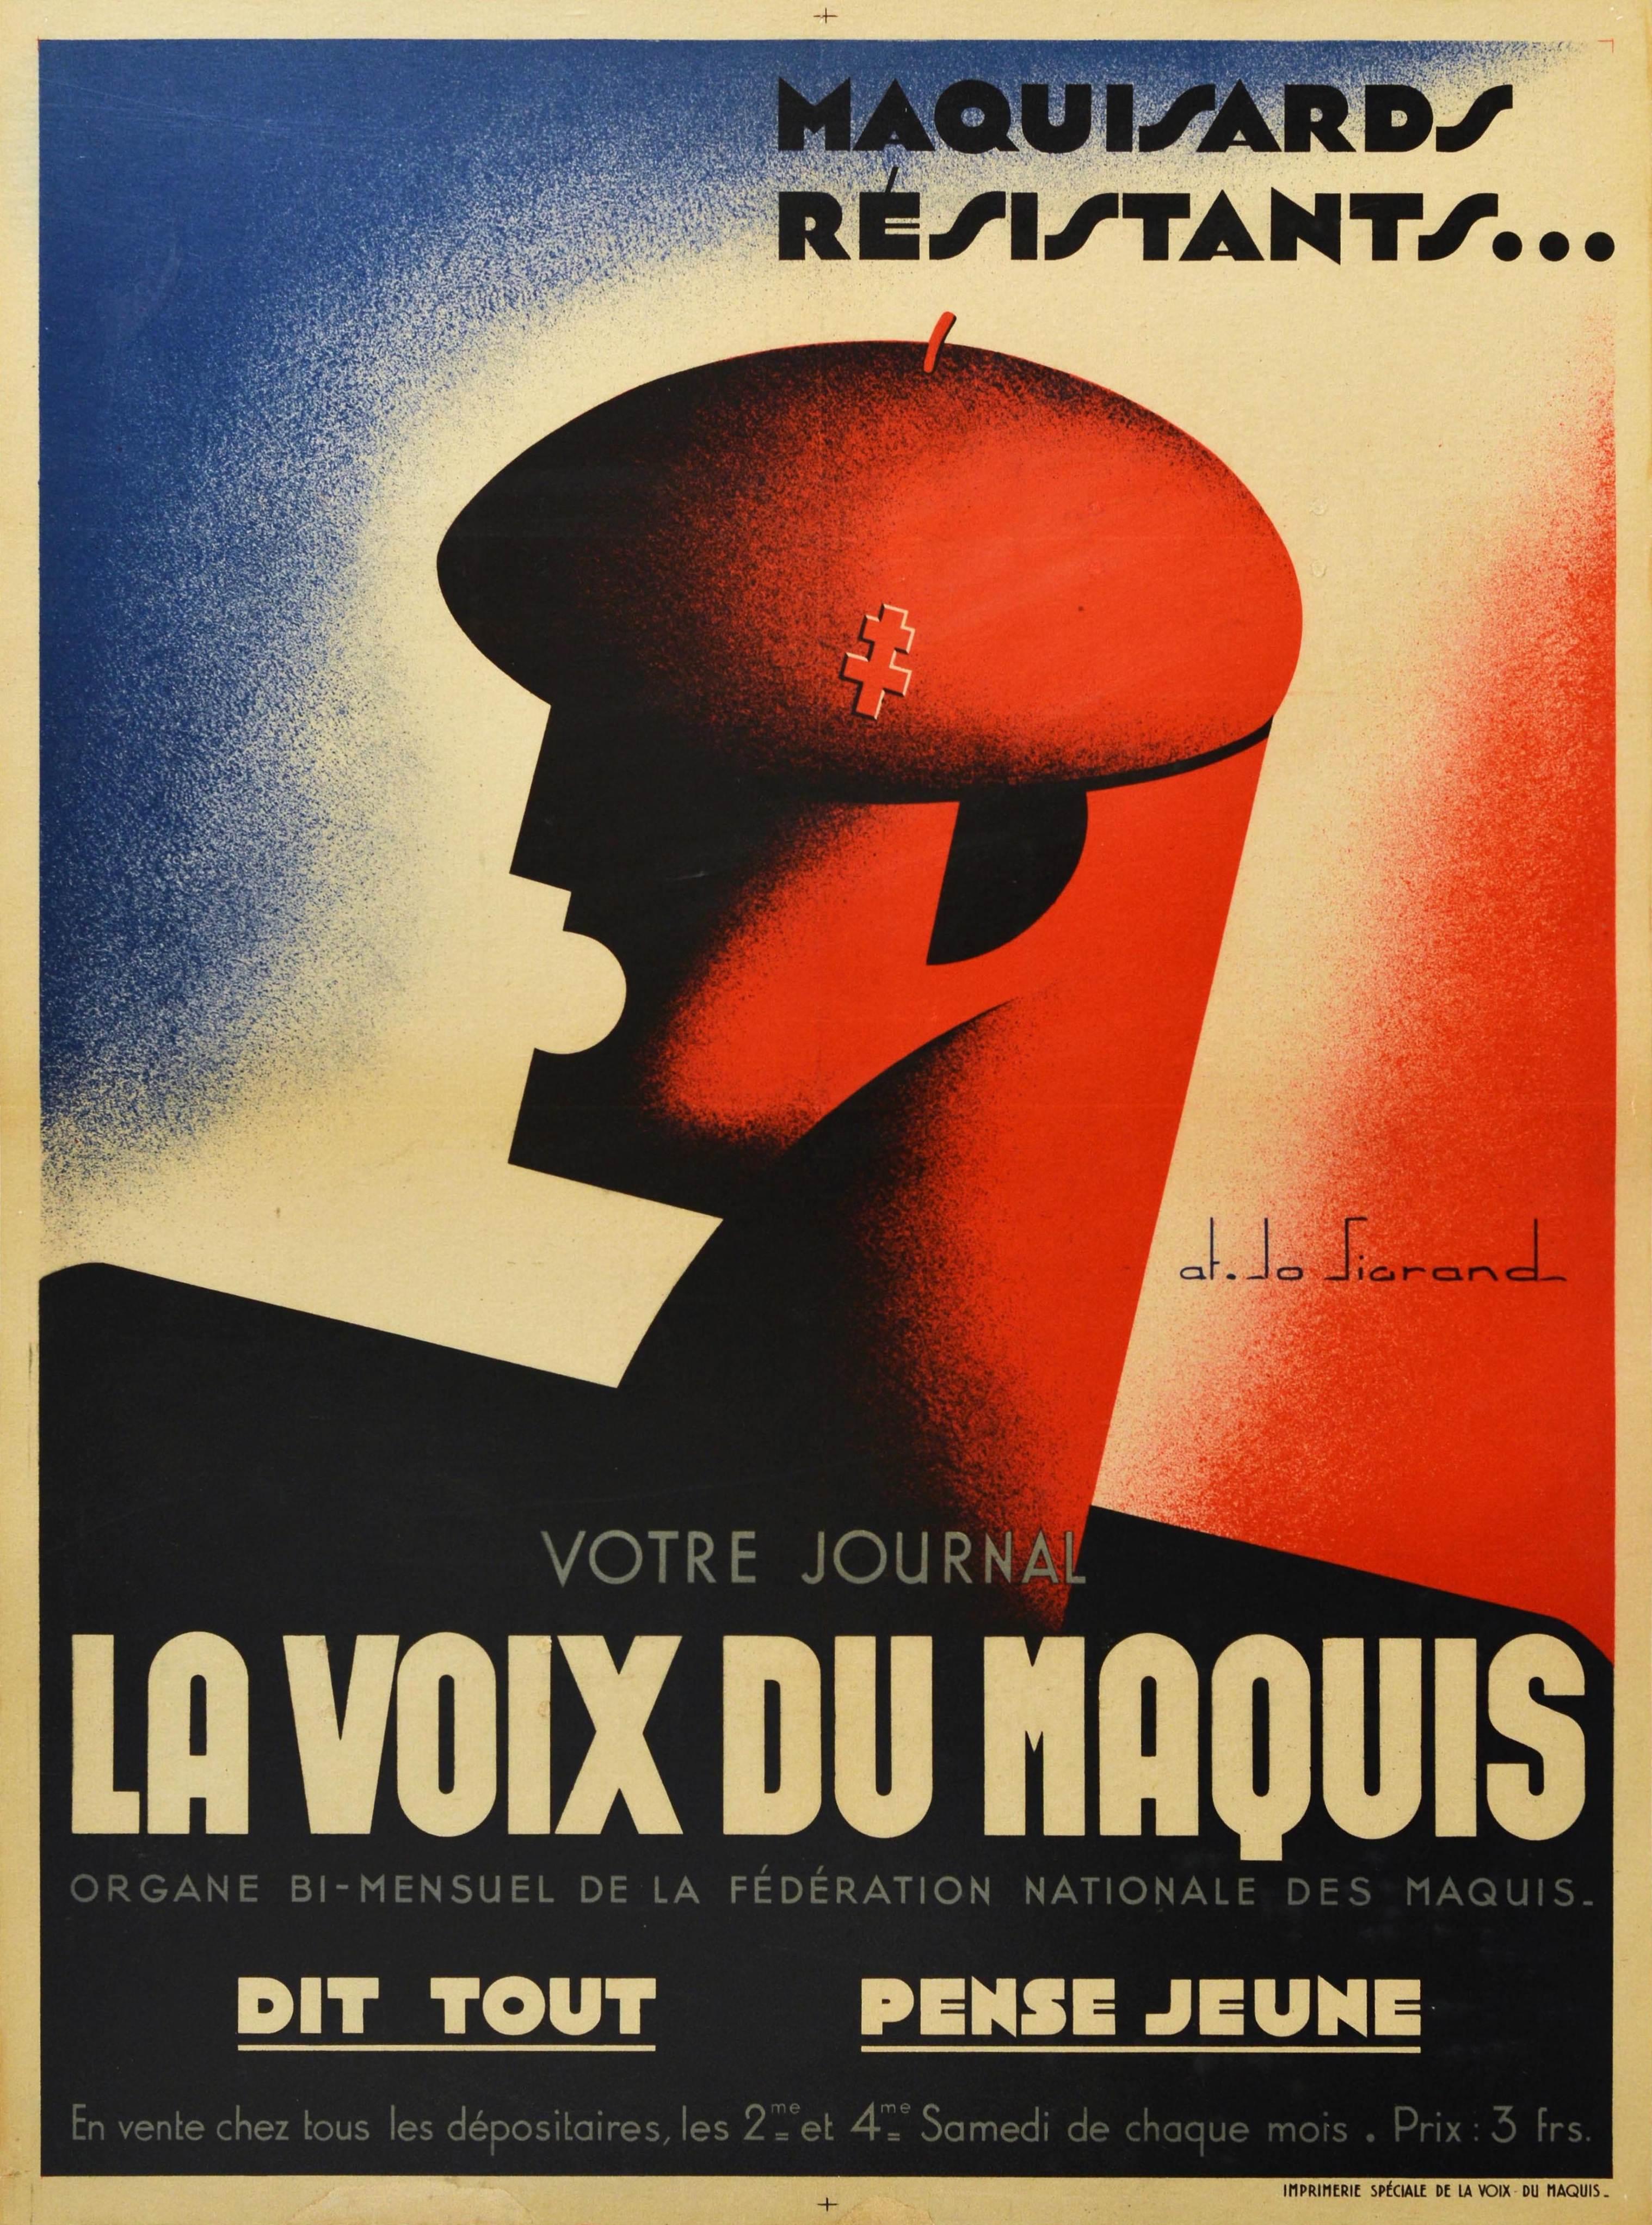 Sigrand Print - Original Vintage WWII Poster French Resistance Voix Du Maquis Fighters Magazine